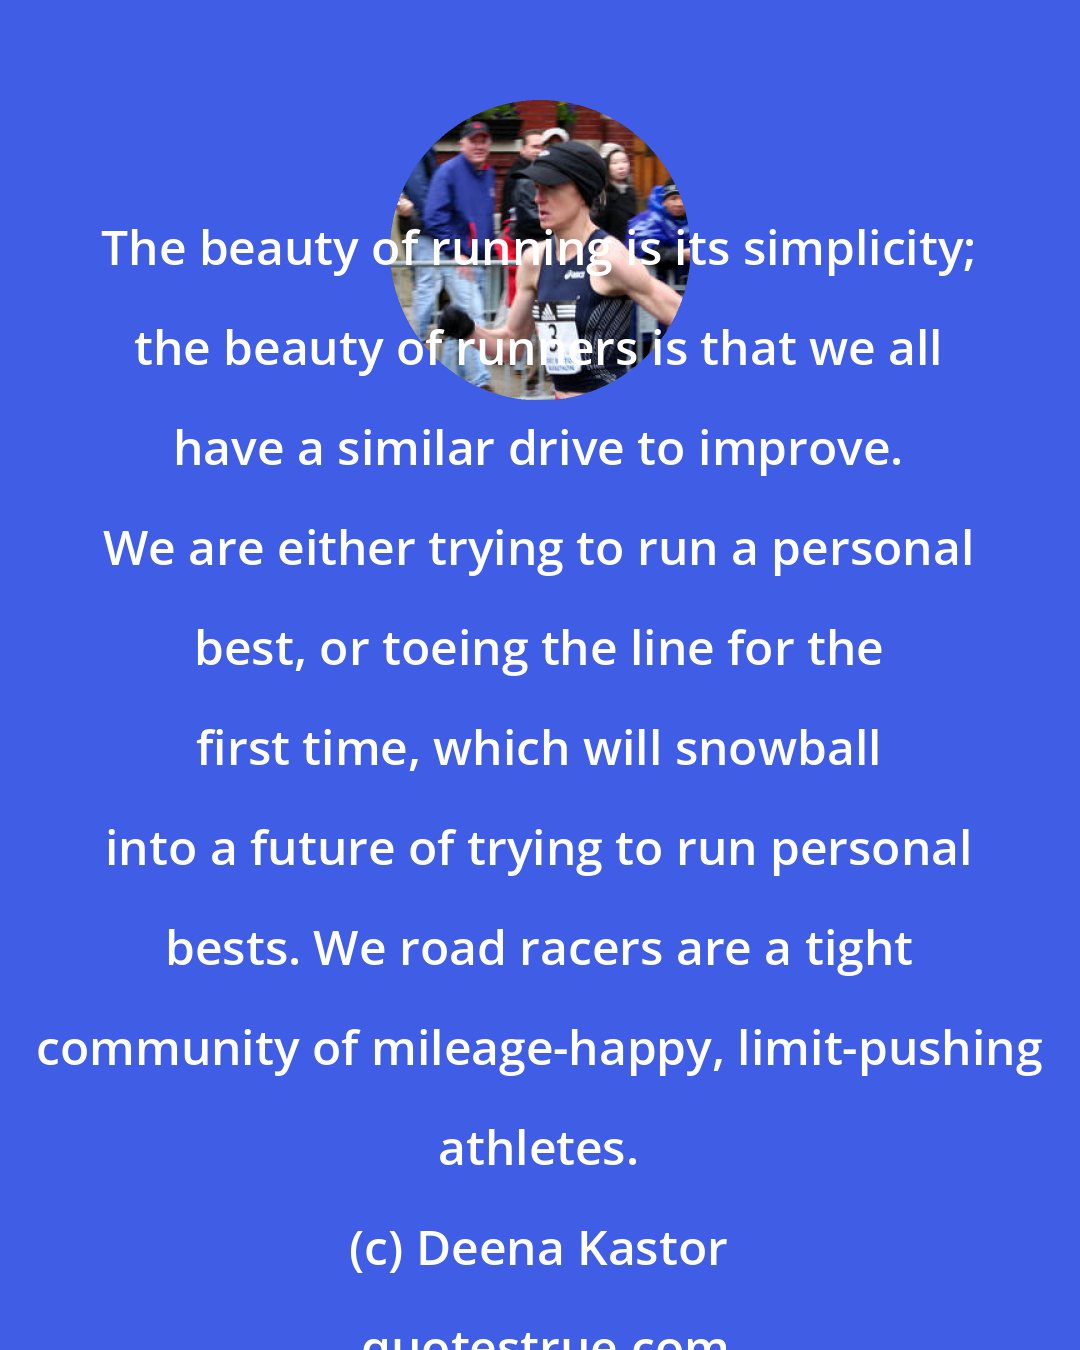 Deena Kastor: The beauty of running is its simplicity; the beauty of runners is that we all have a similar drive to improve. We are either trying to run a personal best, or toeing the line for the first time, which will snowball into a future of trying to run personal bests. We road racers are a tight community of mileage-happy, limit-pushing athletes.